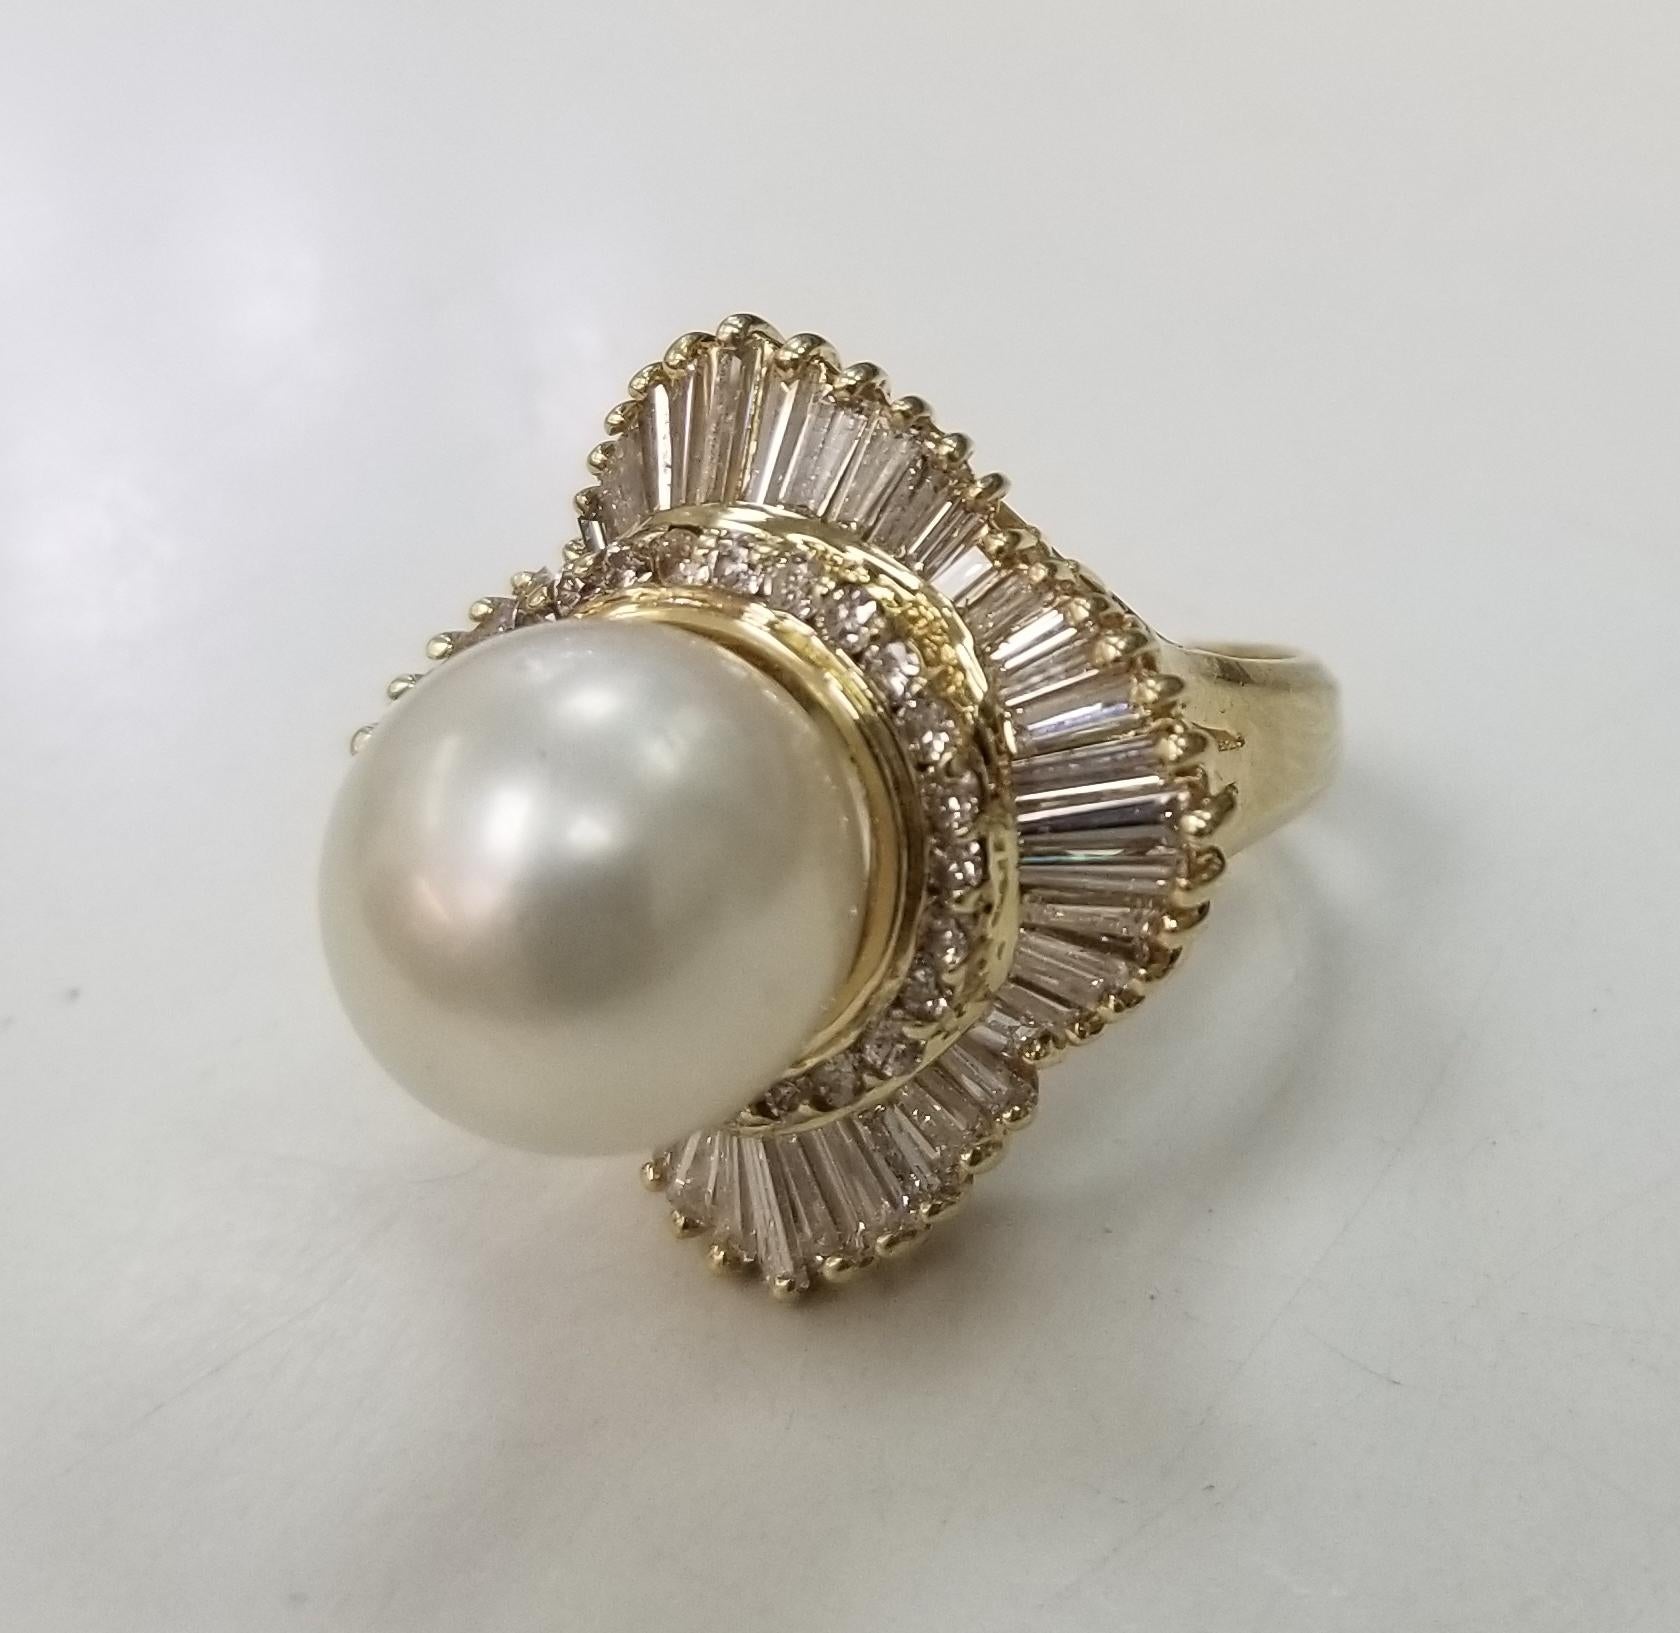 Gorgeous 14k yellow gold south sea pearl with diamonds baguette ballerina.
Specifications:
    main stone: 12mm White South Sea Pearl
    diamonds: 50 baguette PIECES
    carat total weight: APPROX 2.50 CTW
    color: G
    clarity: VS1
    diamond: